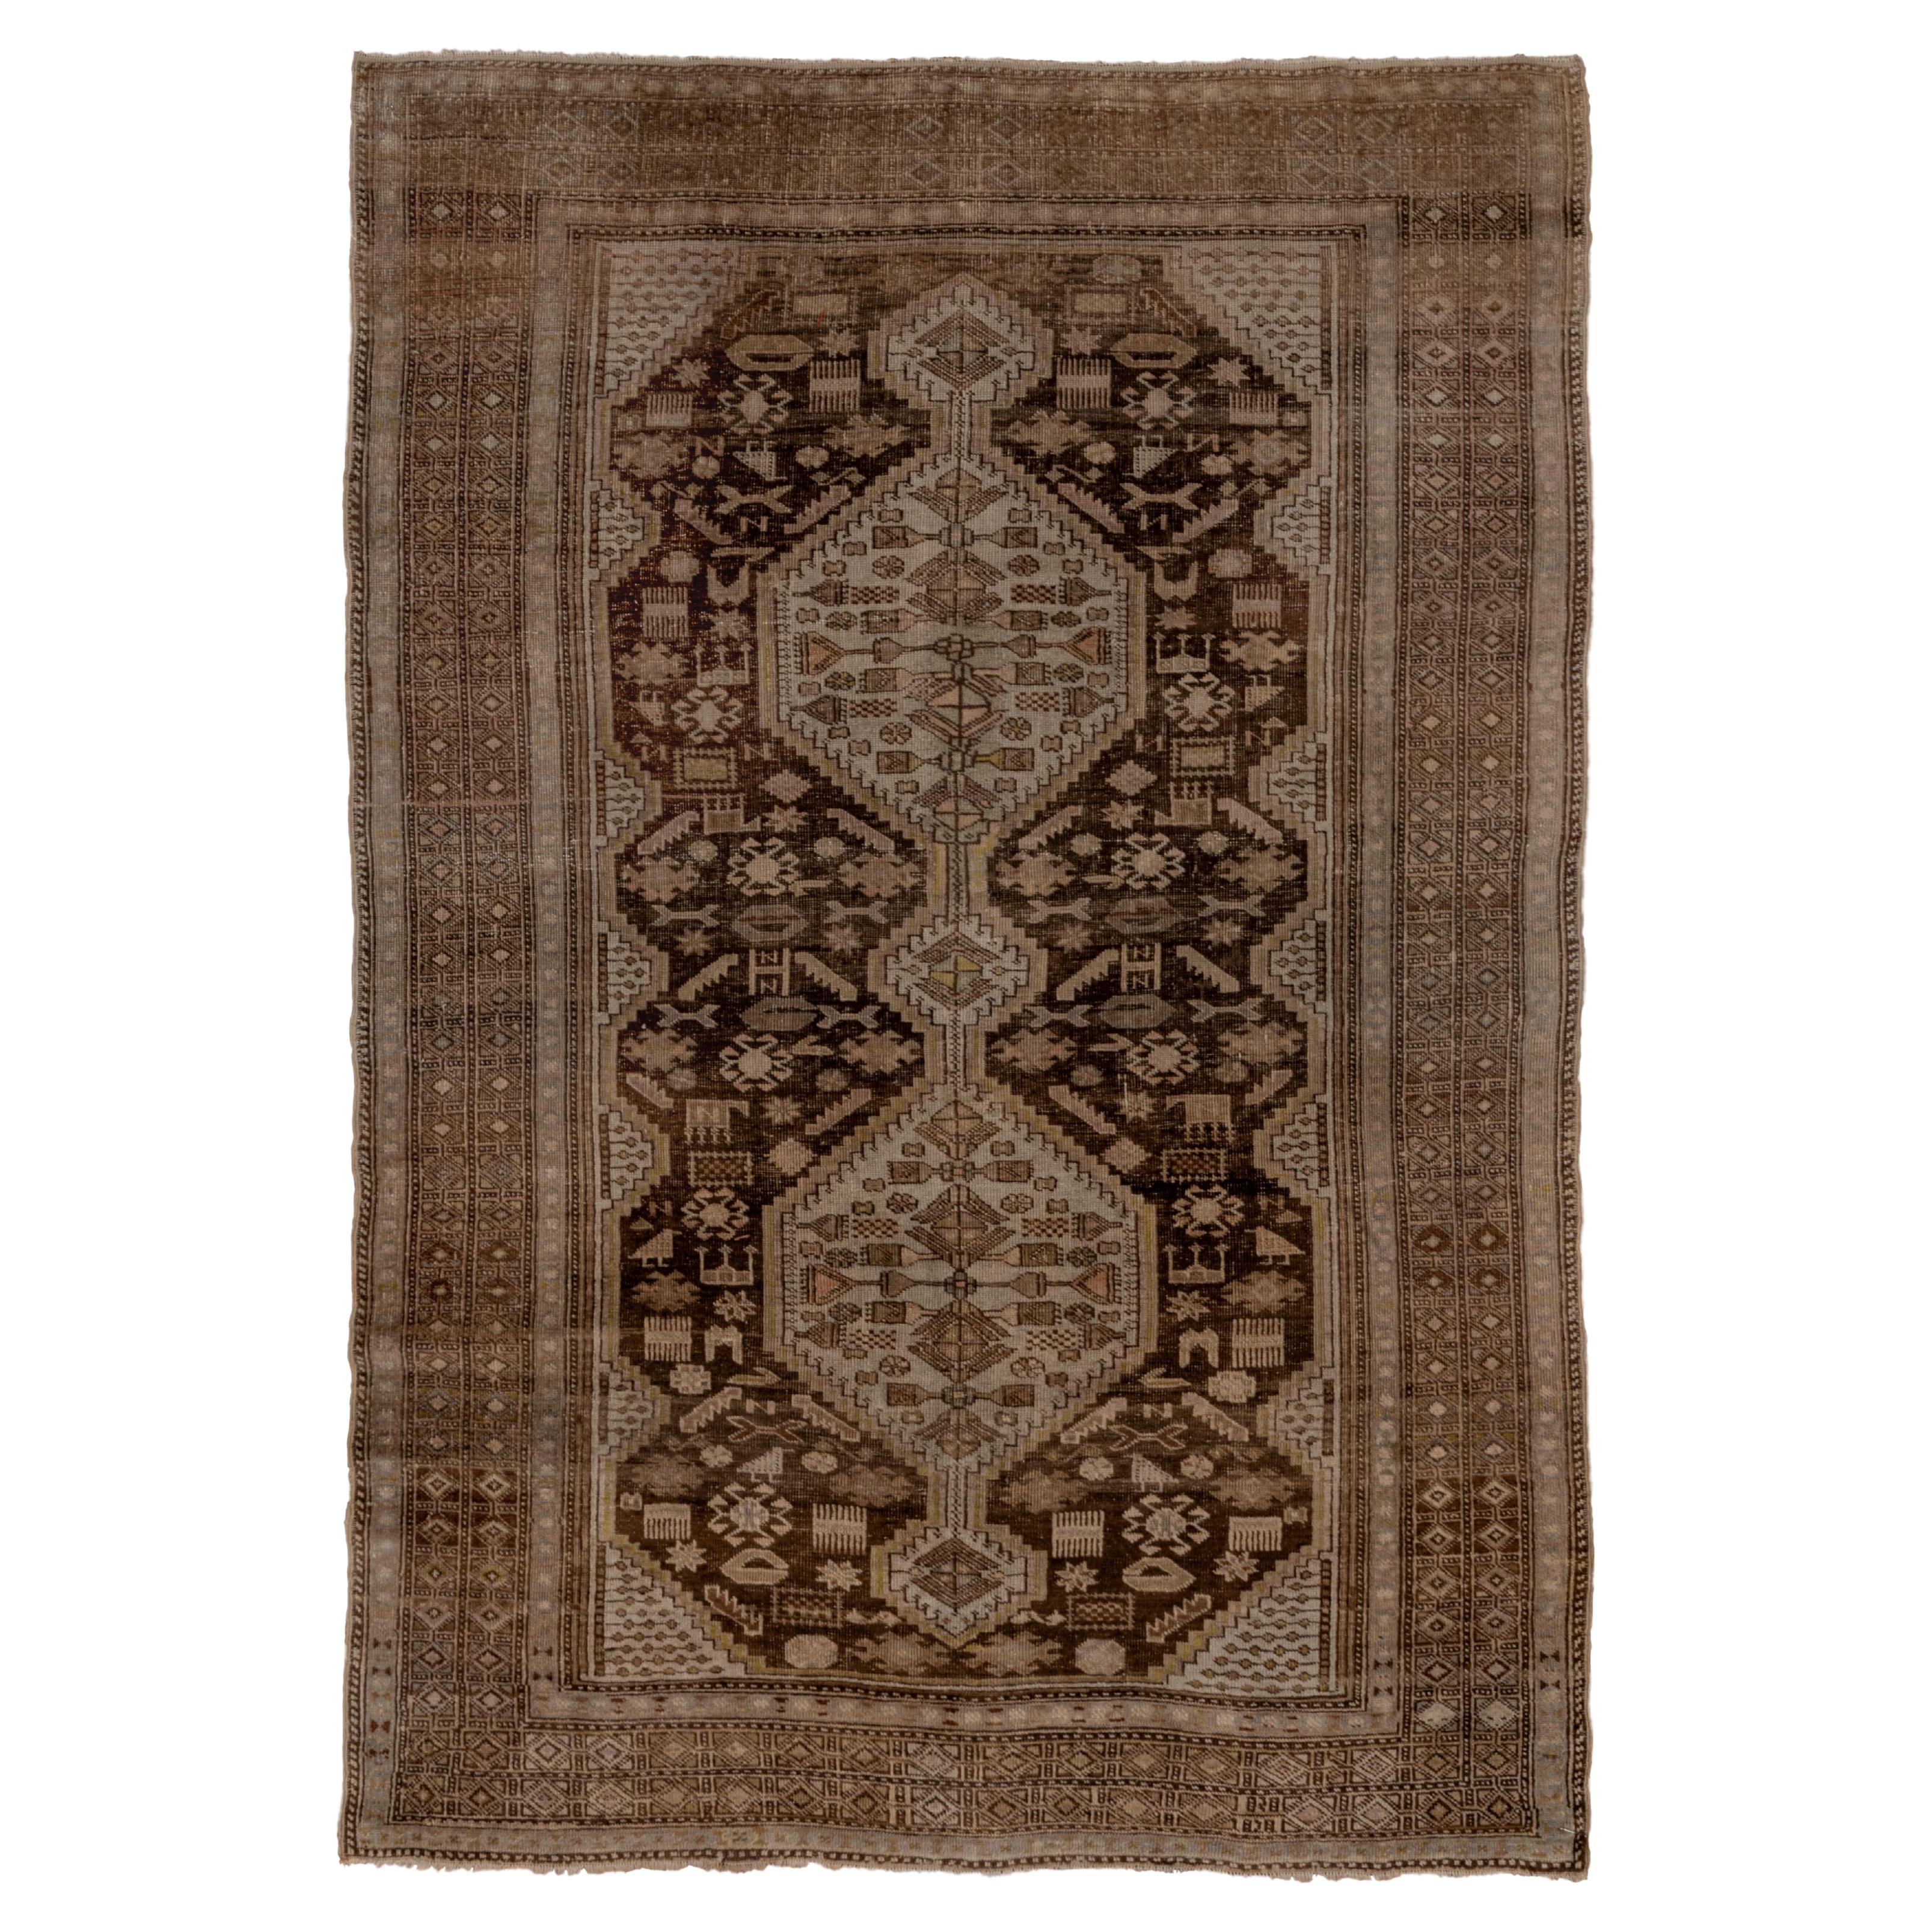 Caucasian Tribal Rug in Olives and Browns